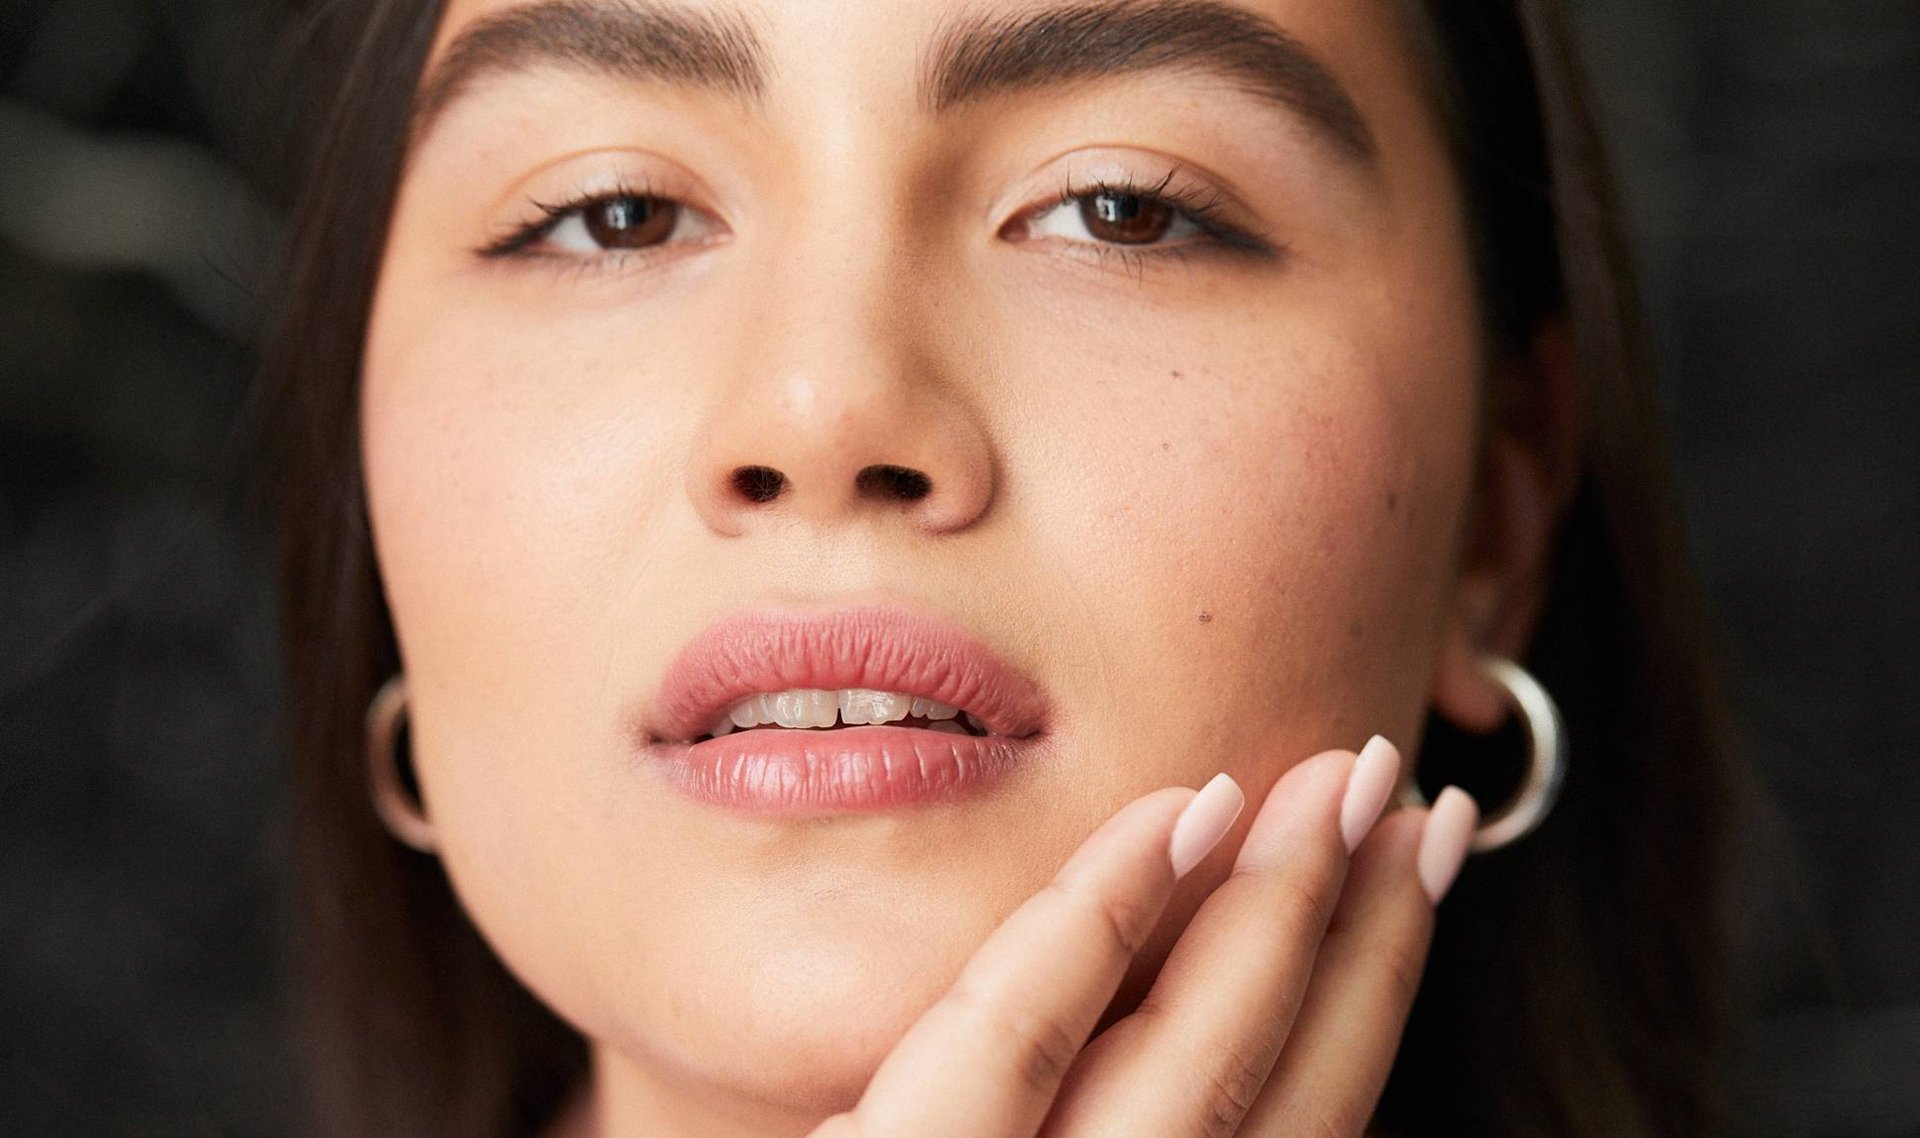 What Exactly Is a Chemical Peel? An Esthetician Explains